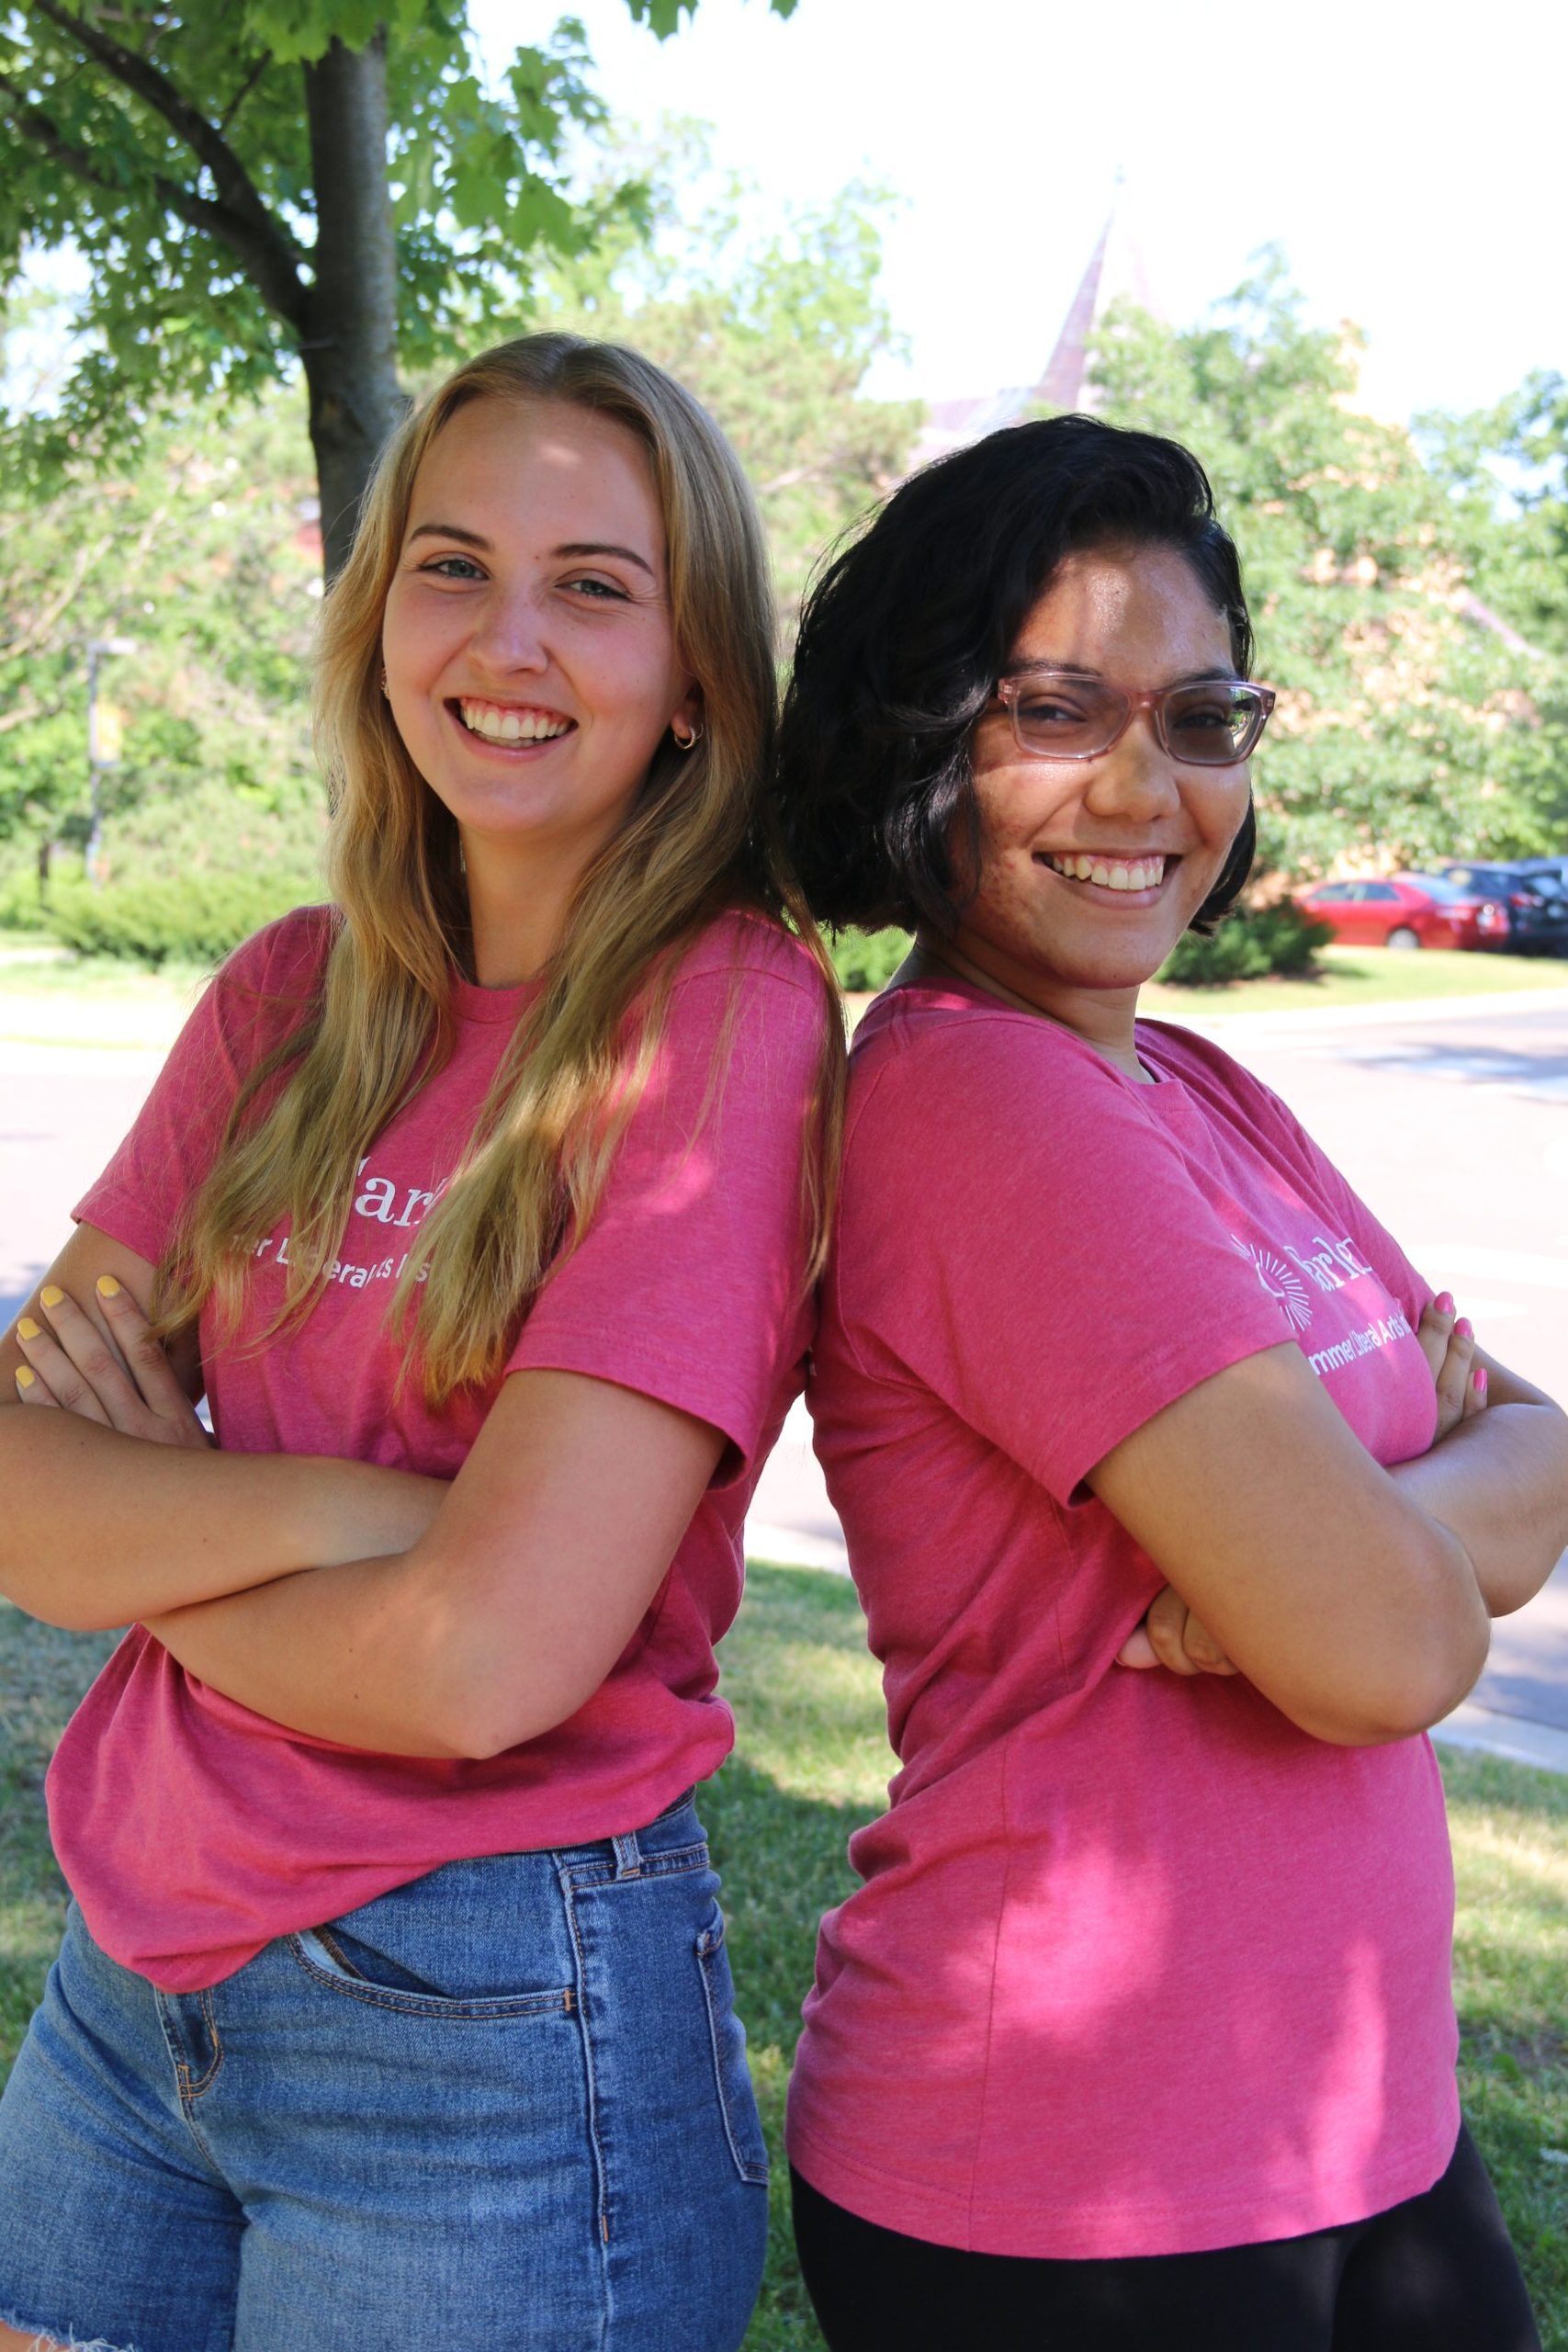 Two students standing back to back with their arms crossed, smiling and looking at the camera. They are wearing pink t-shirts that have the Carleton logo on the front.